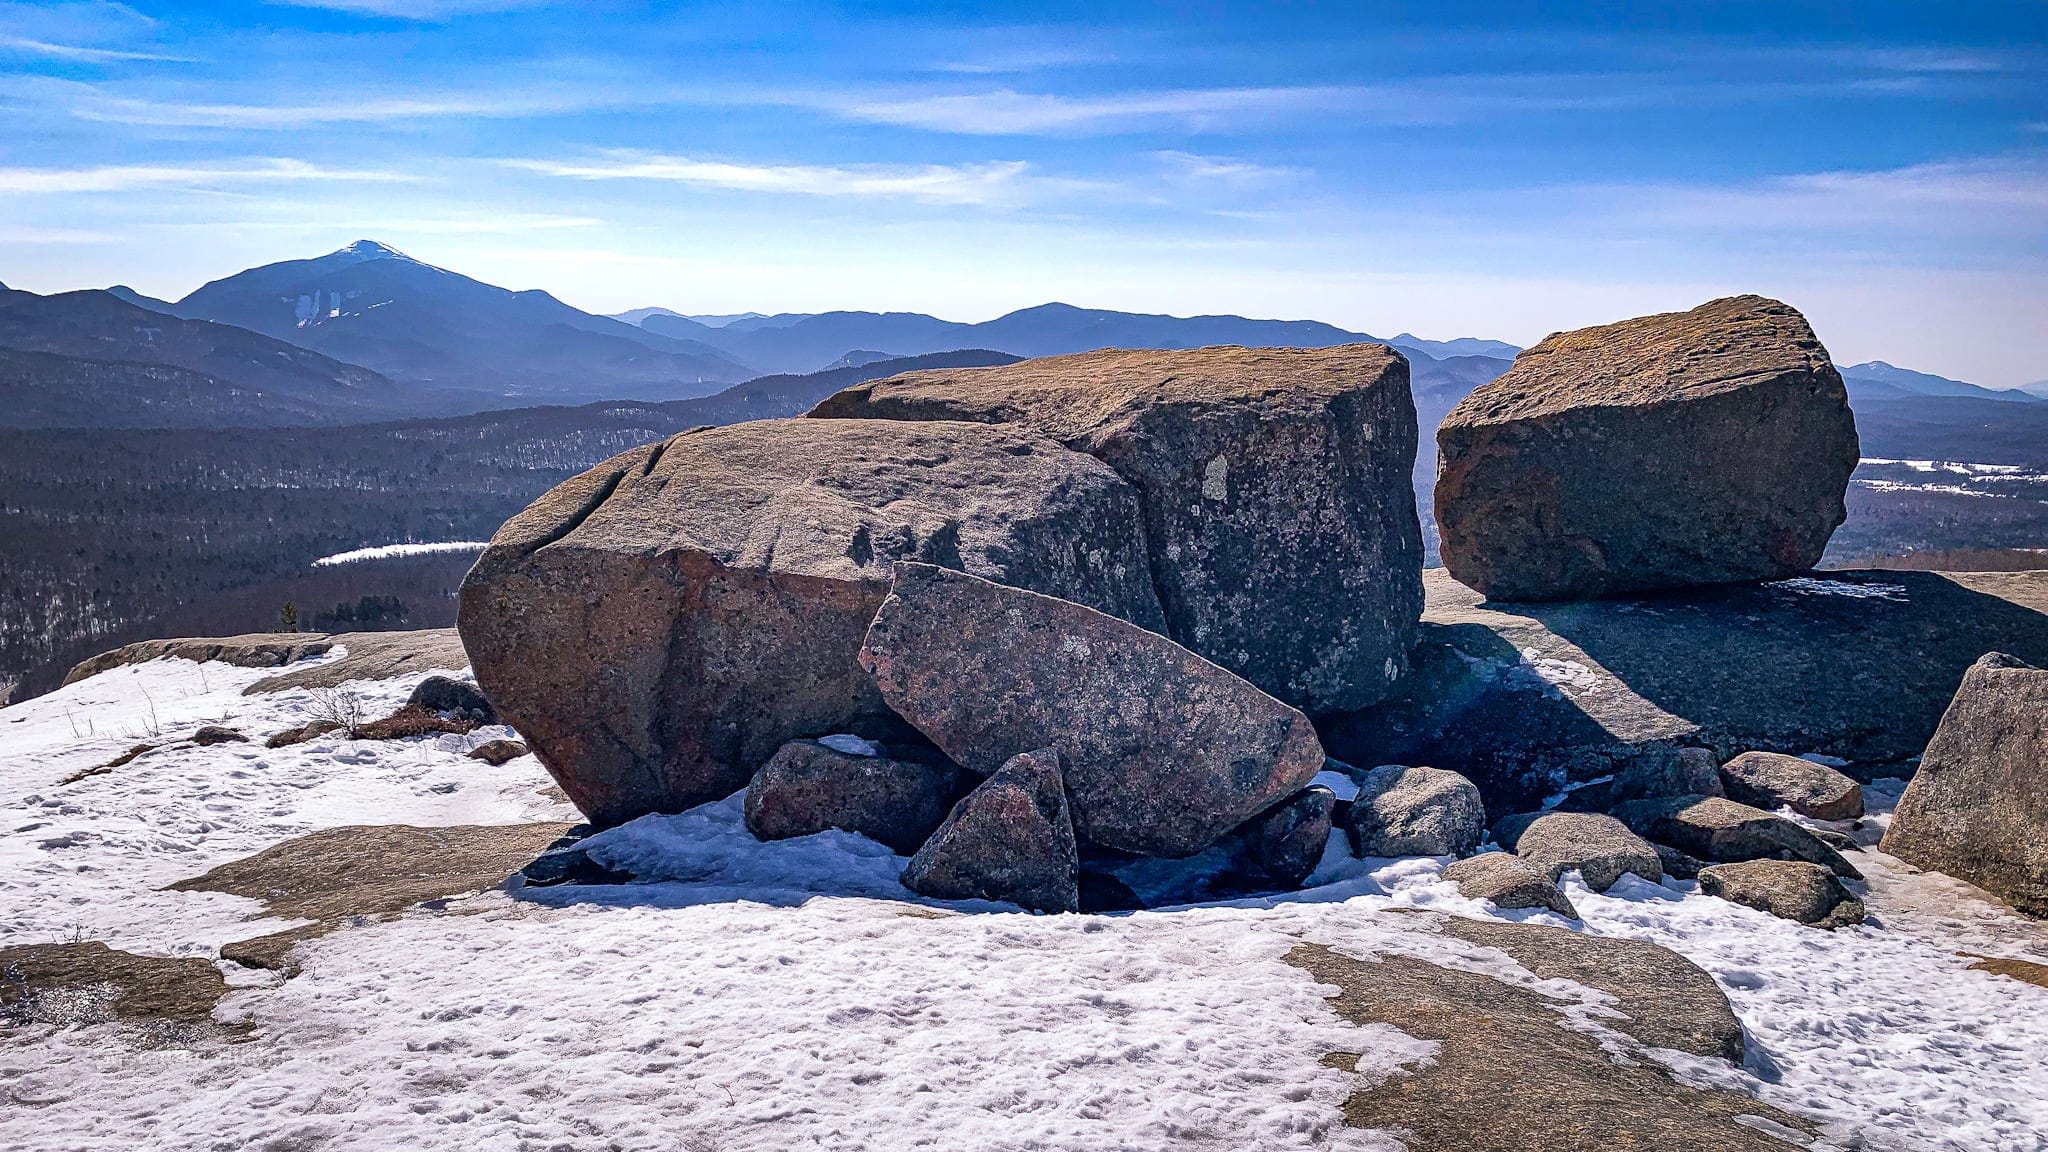 large glacial erratic boulders with mountain summits behind